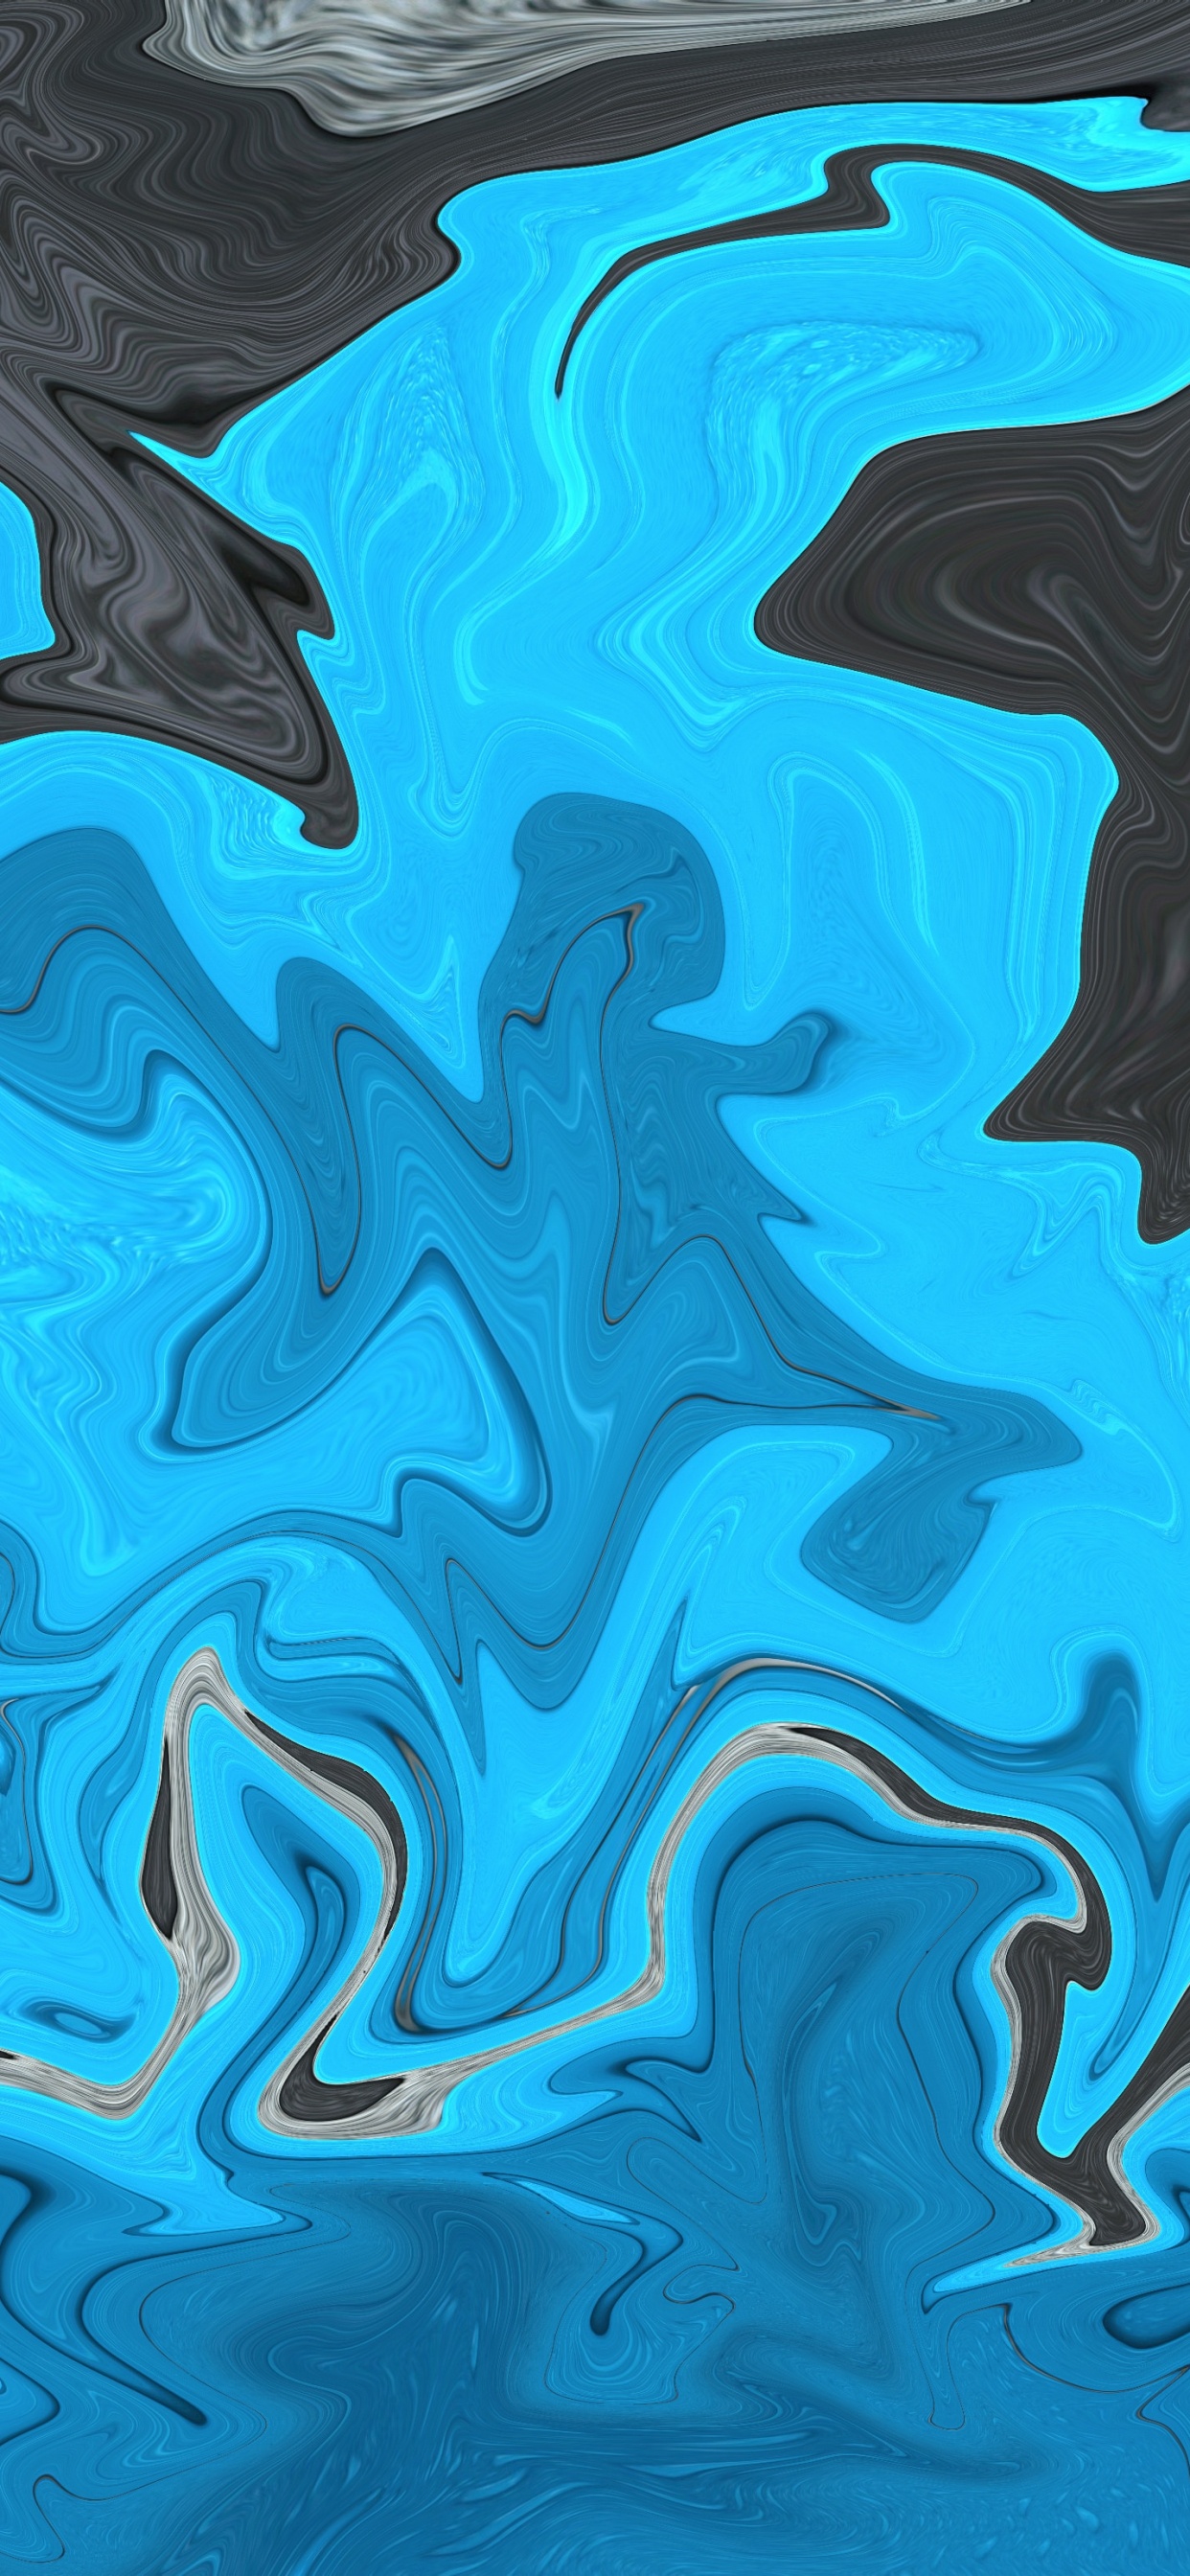 Blue and Black Abstract Painting. Wallpaper in 1242x2688 Resolution